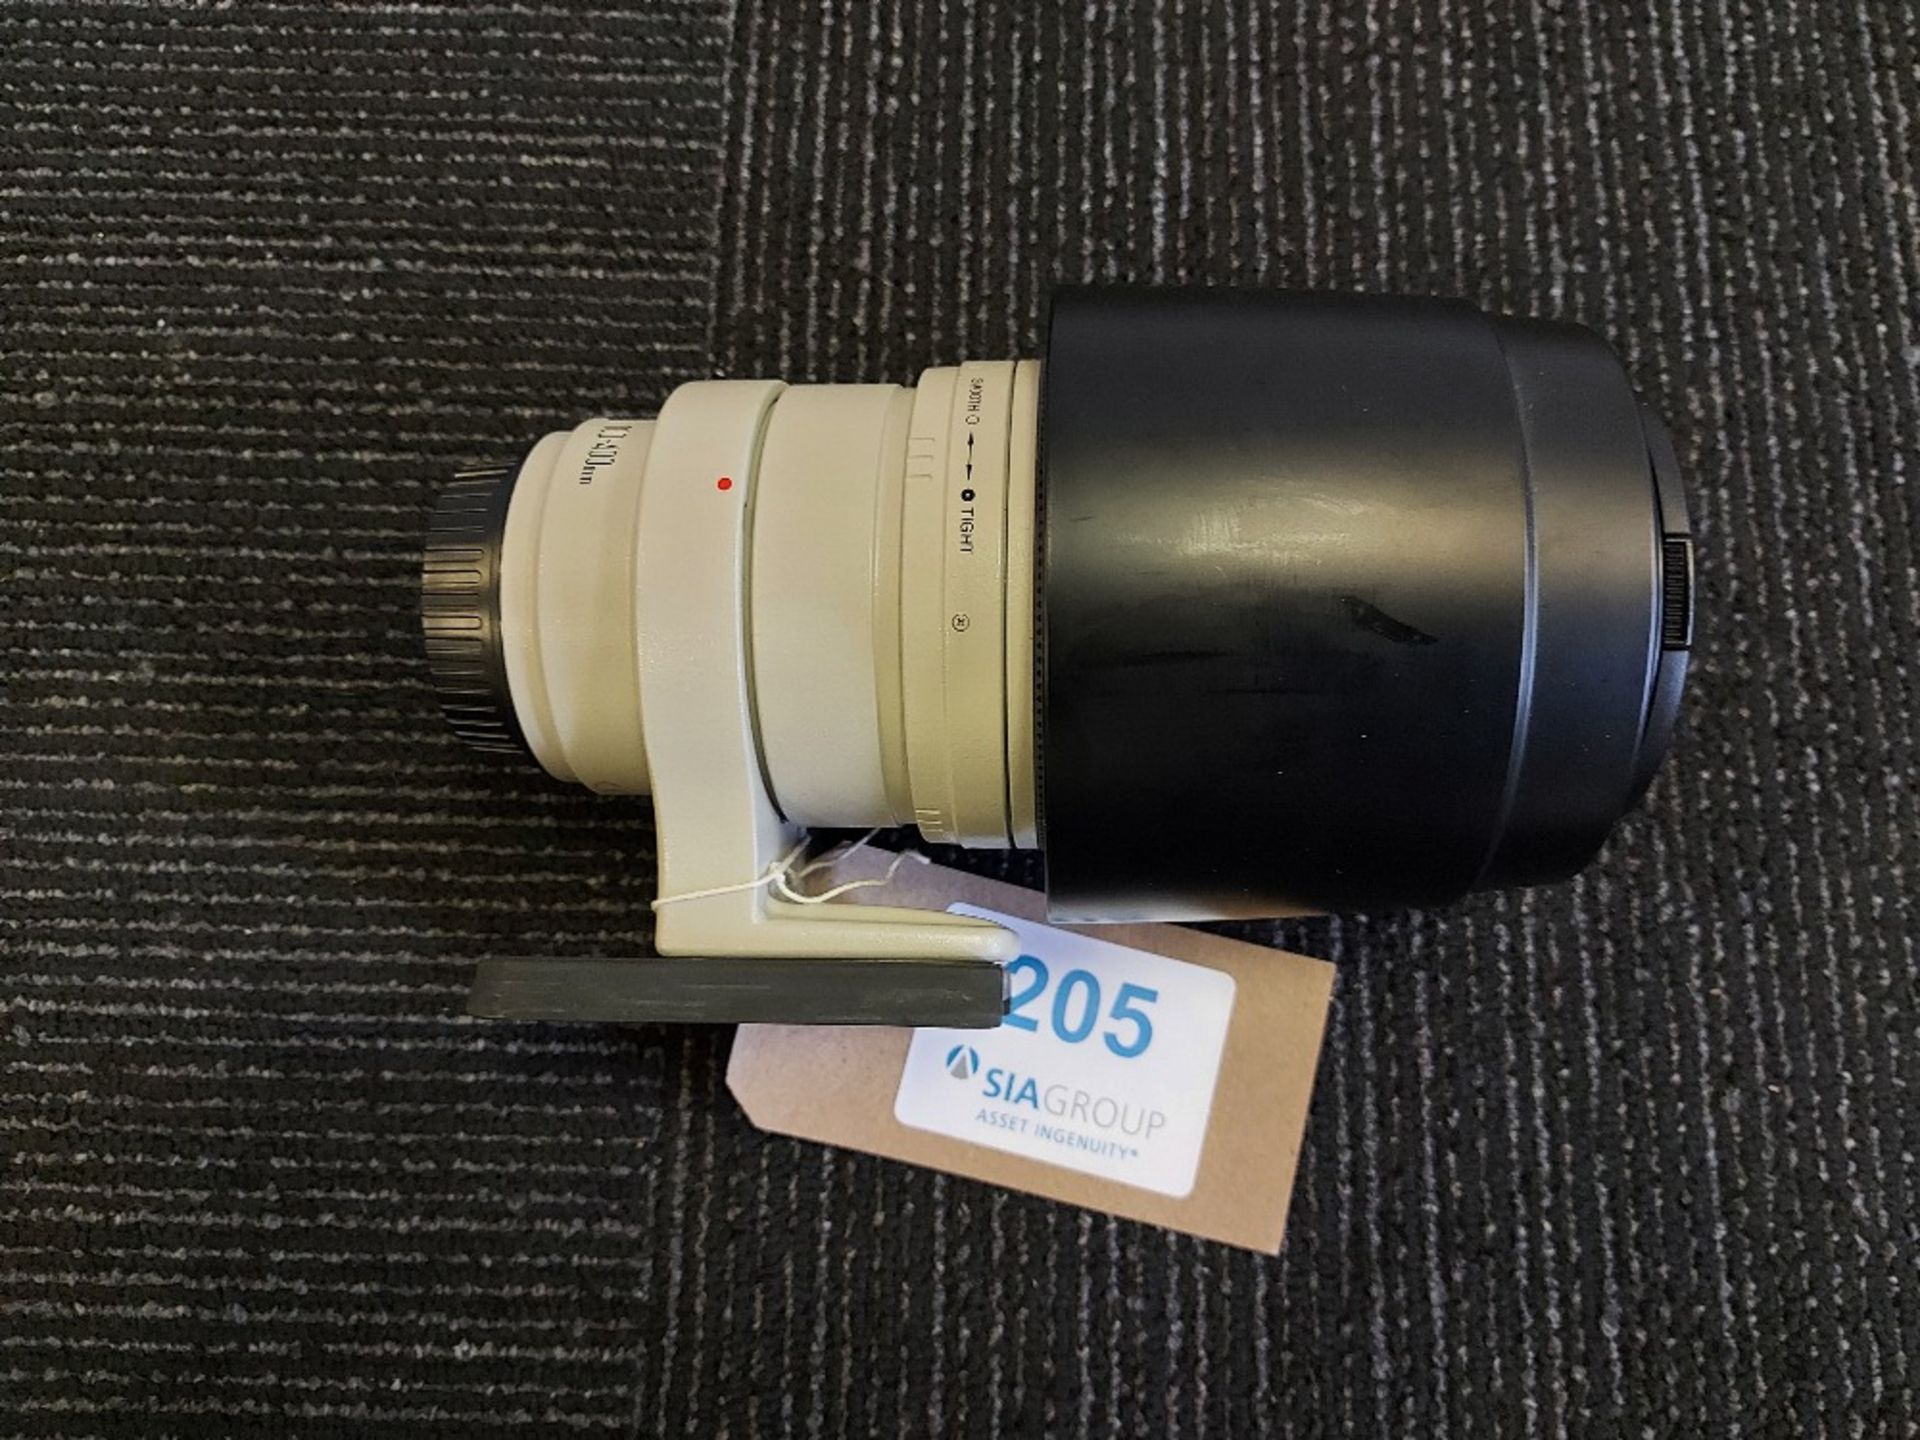 Canon Zoom EF 100-400mm 1:4.5-5.6 L IS USM lens attachment - Image 2 of 4